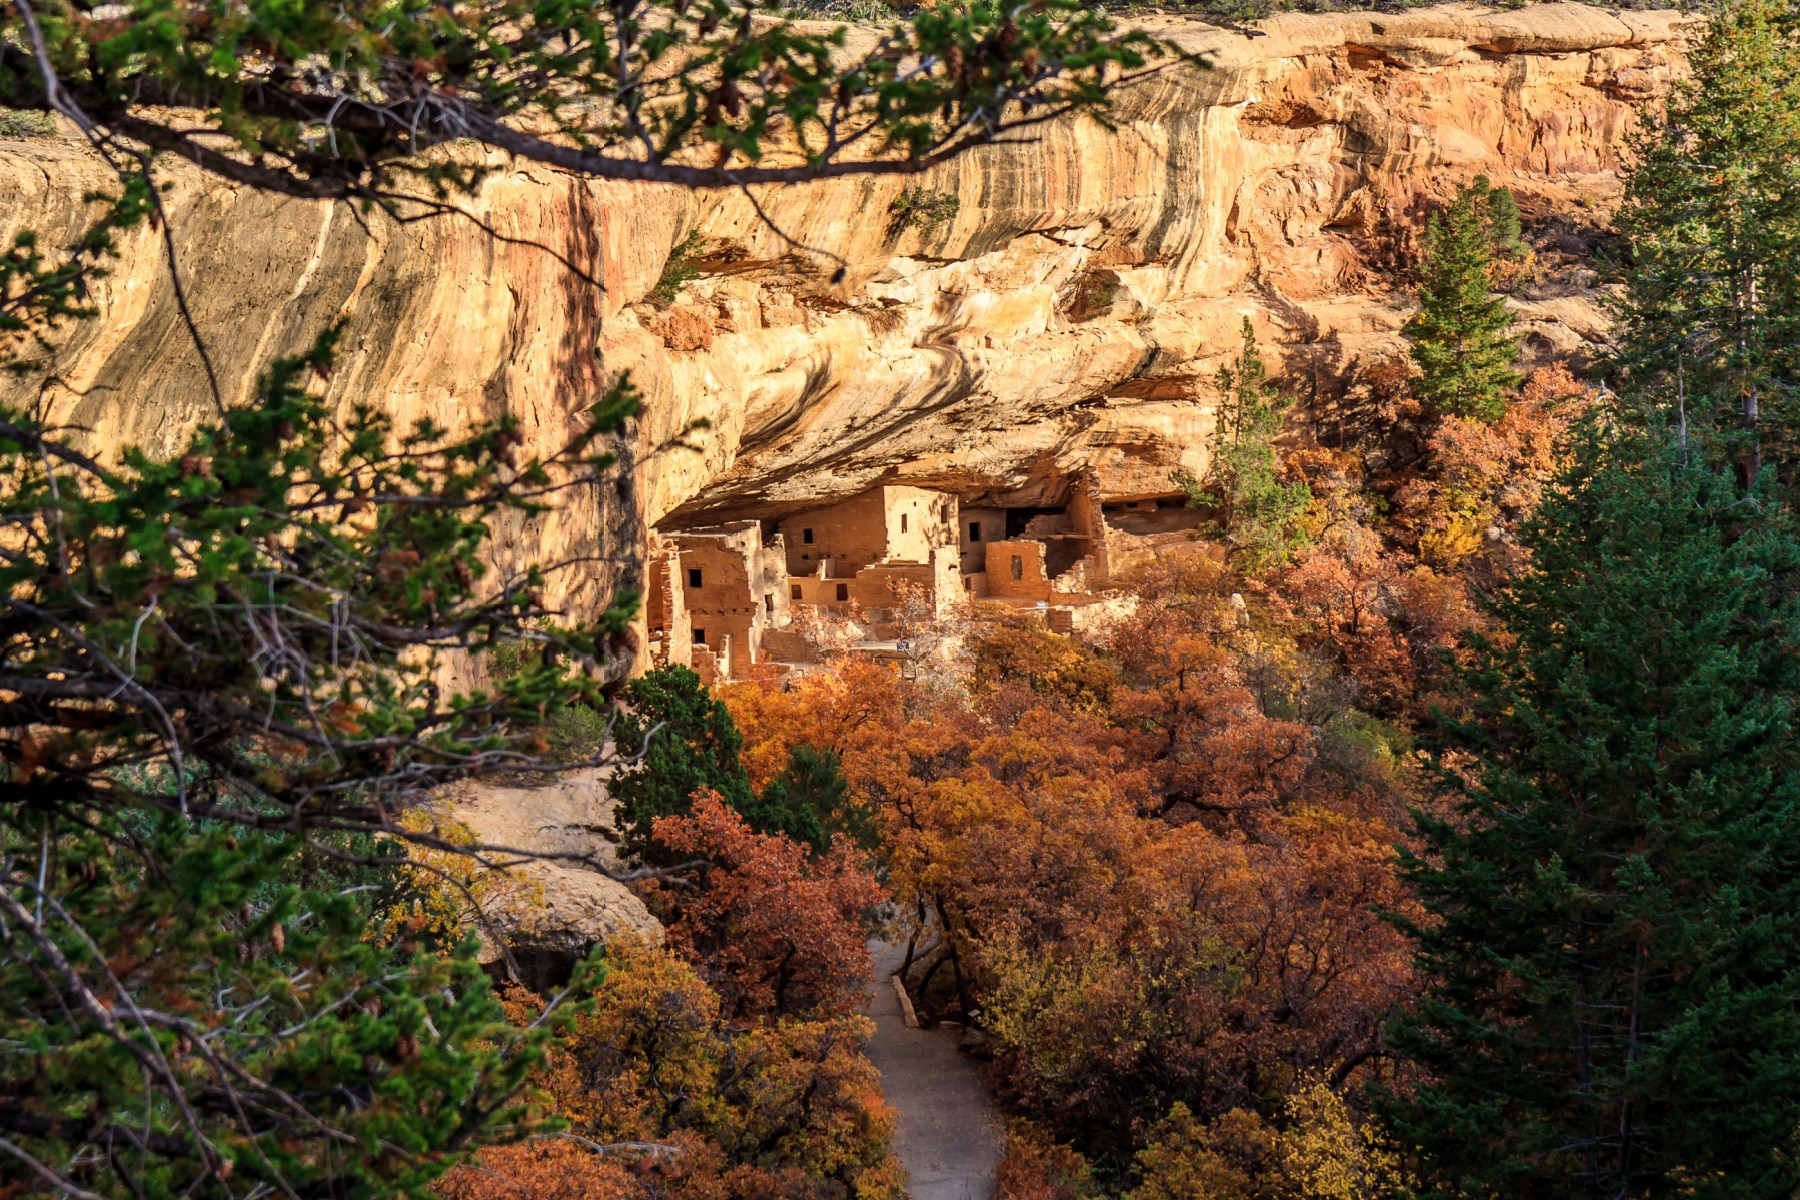 Things to do in Mesa Verde National Park fall visit